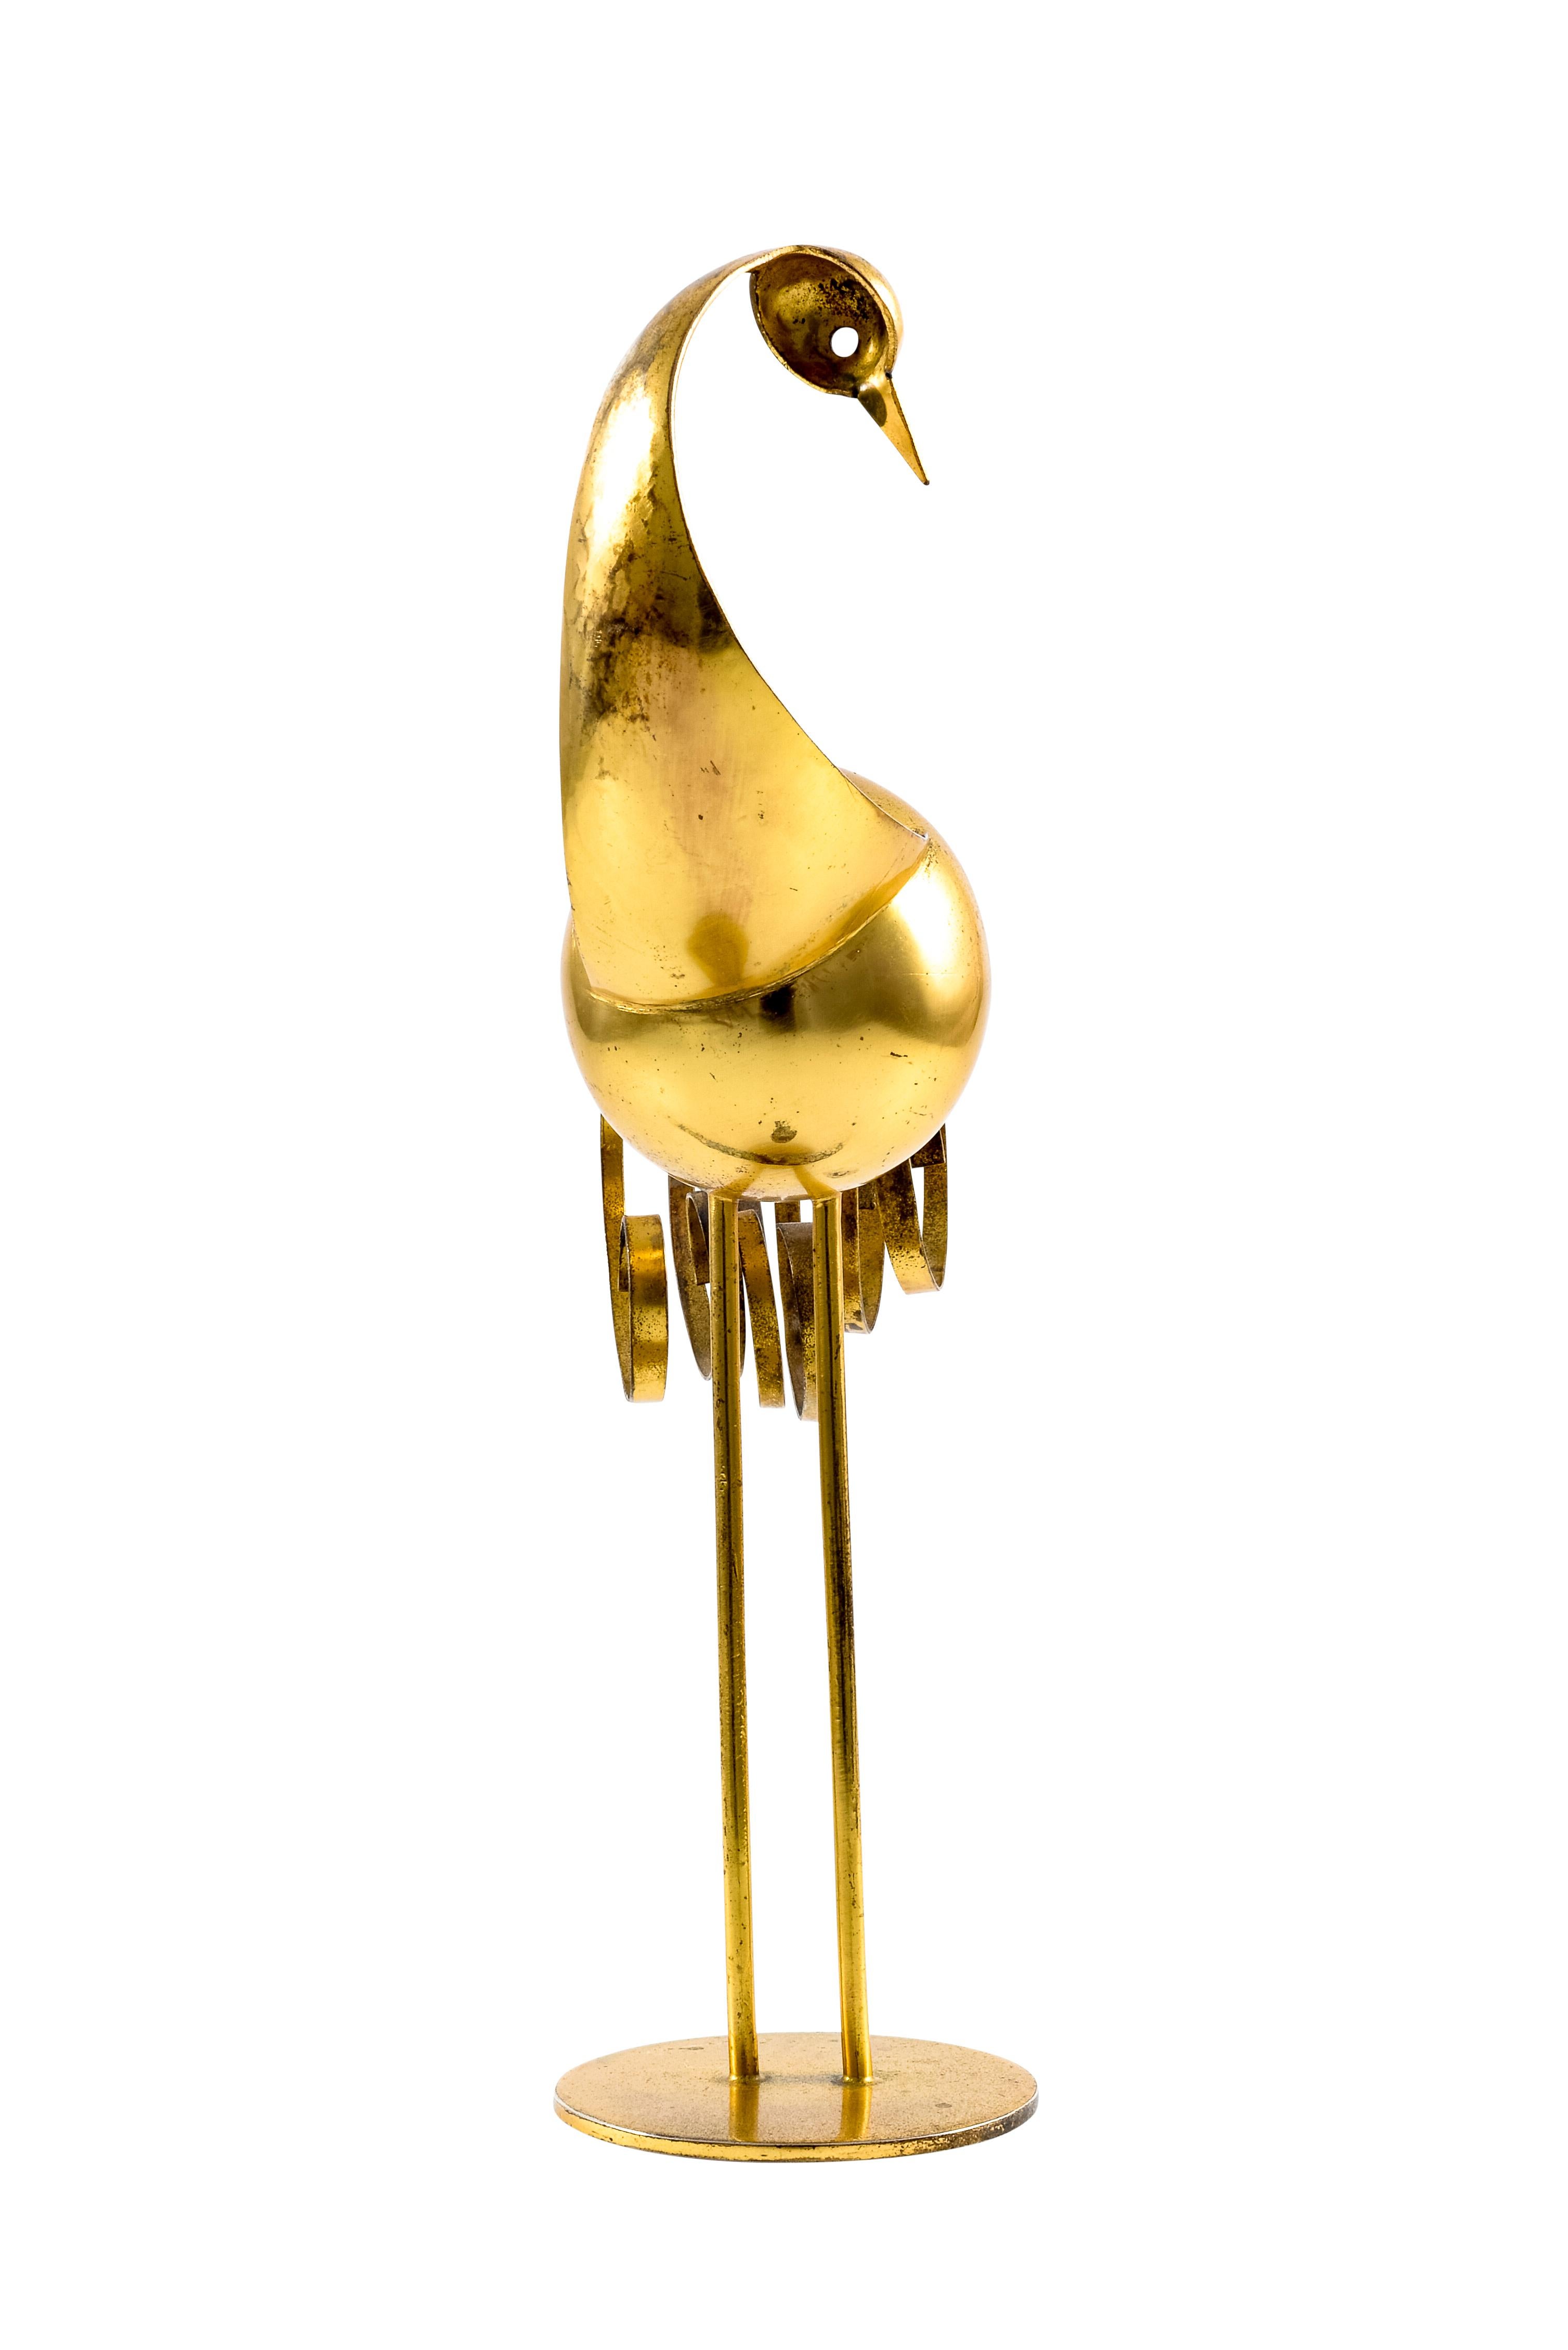 Bird sculpture designed by Franz Hagenauer manufactured by Werkstatte Hagenauer Wien Austrian Art Deco 1930s Brass-plated Alpacca 

Stylized animal depictions in metal and wood were typical products of the Werkstatte Hagenauer Wien. One of the